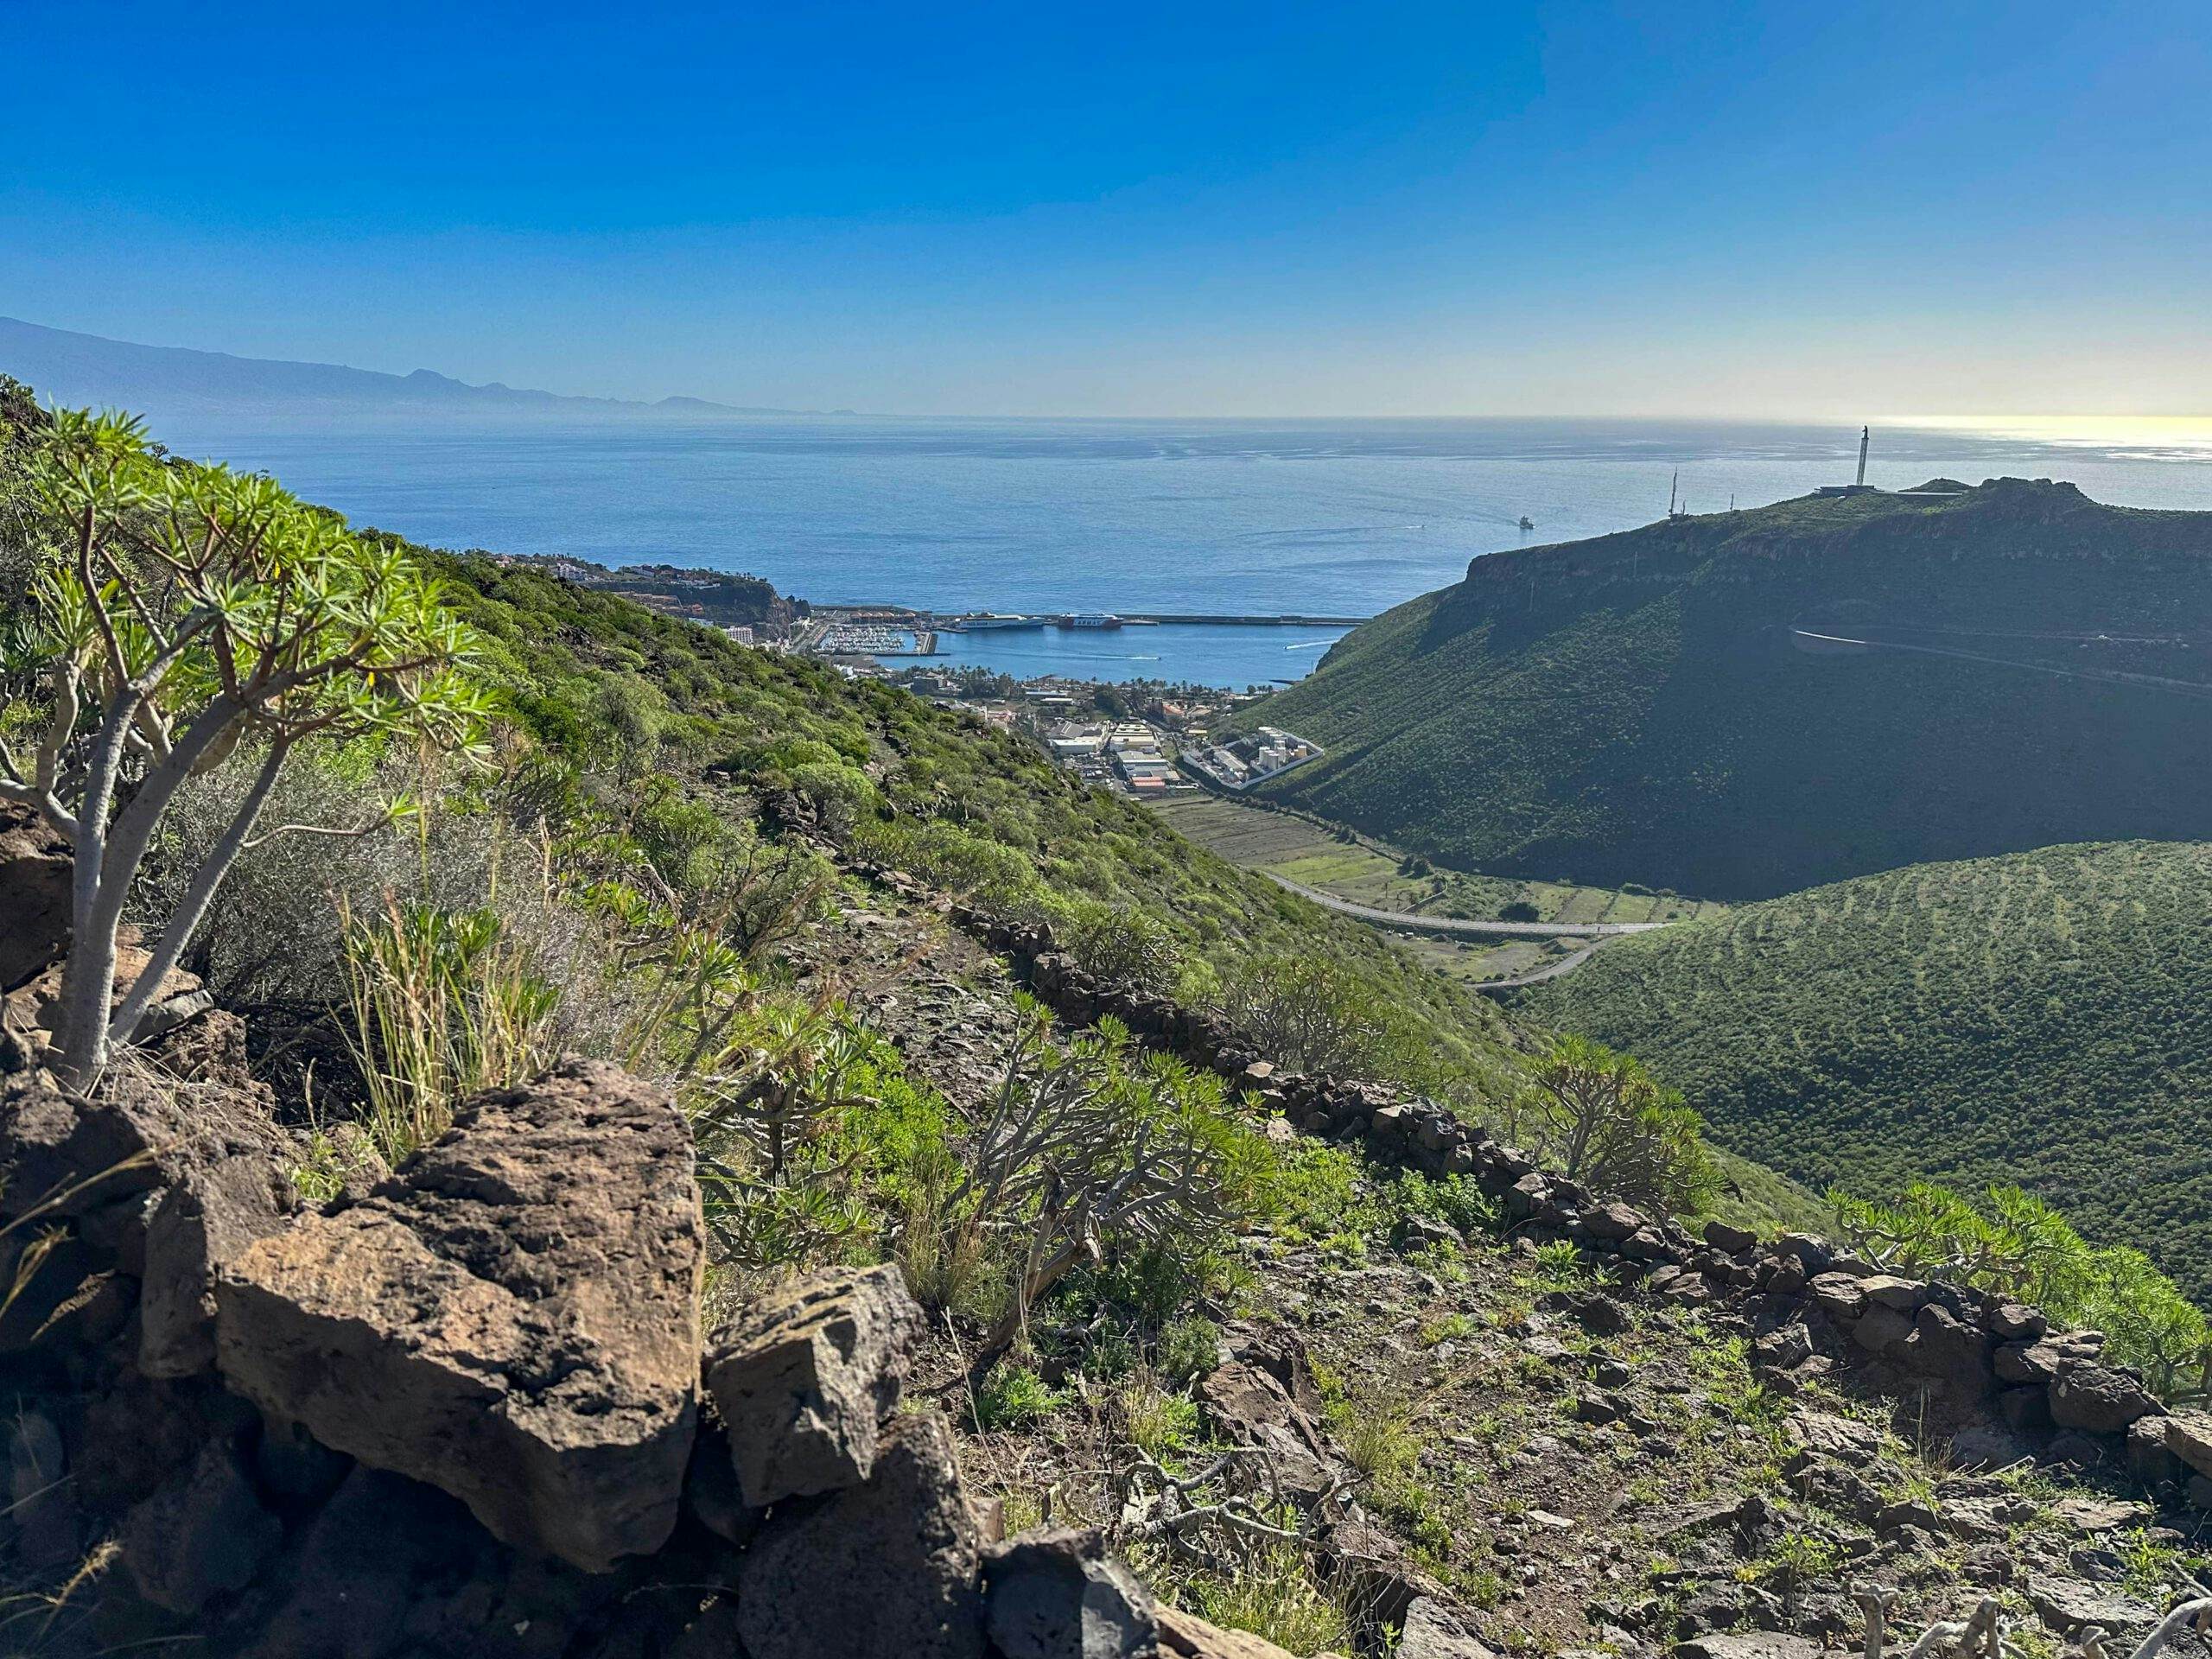 Hiking on the Camino with a view from the heights of San Sebastian with its harbour and Tenerife